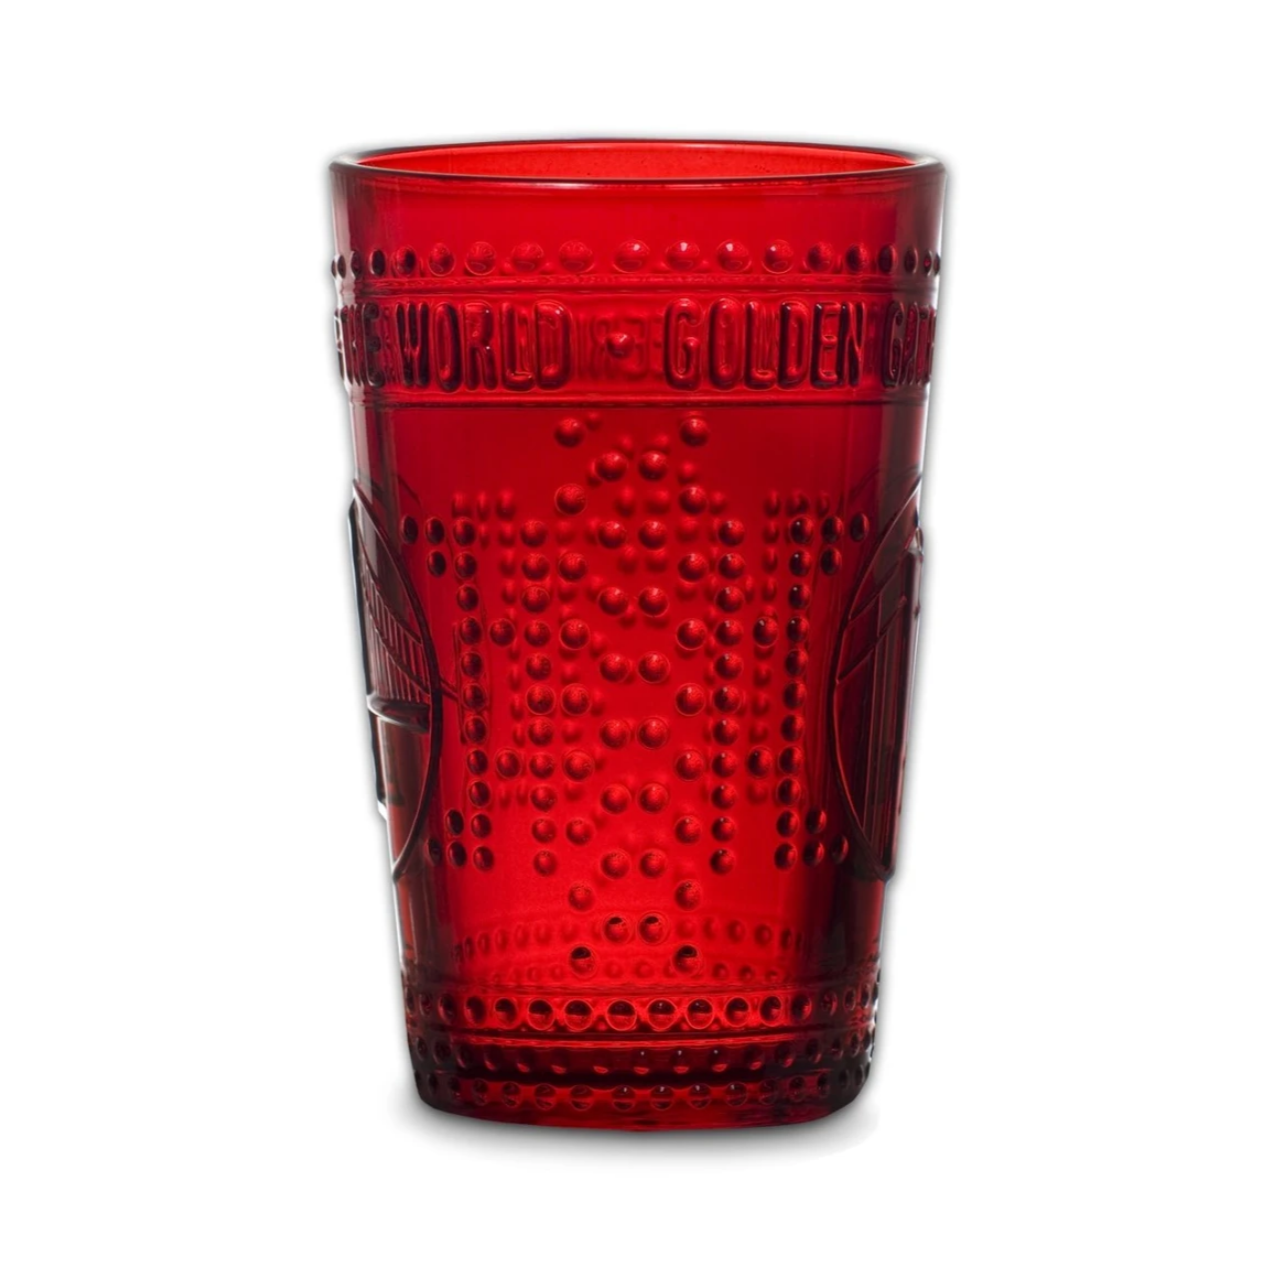 red glass with bumps